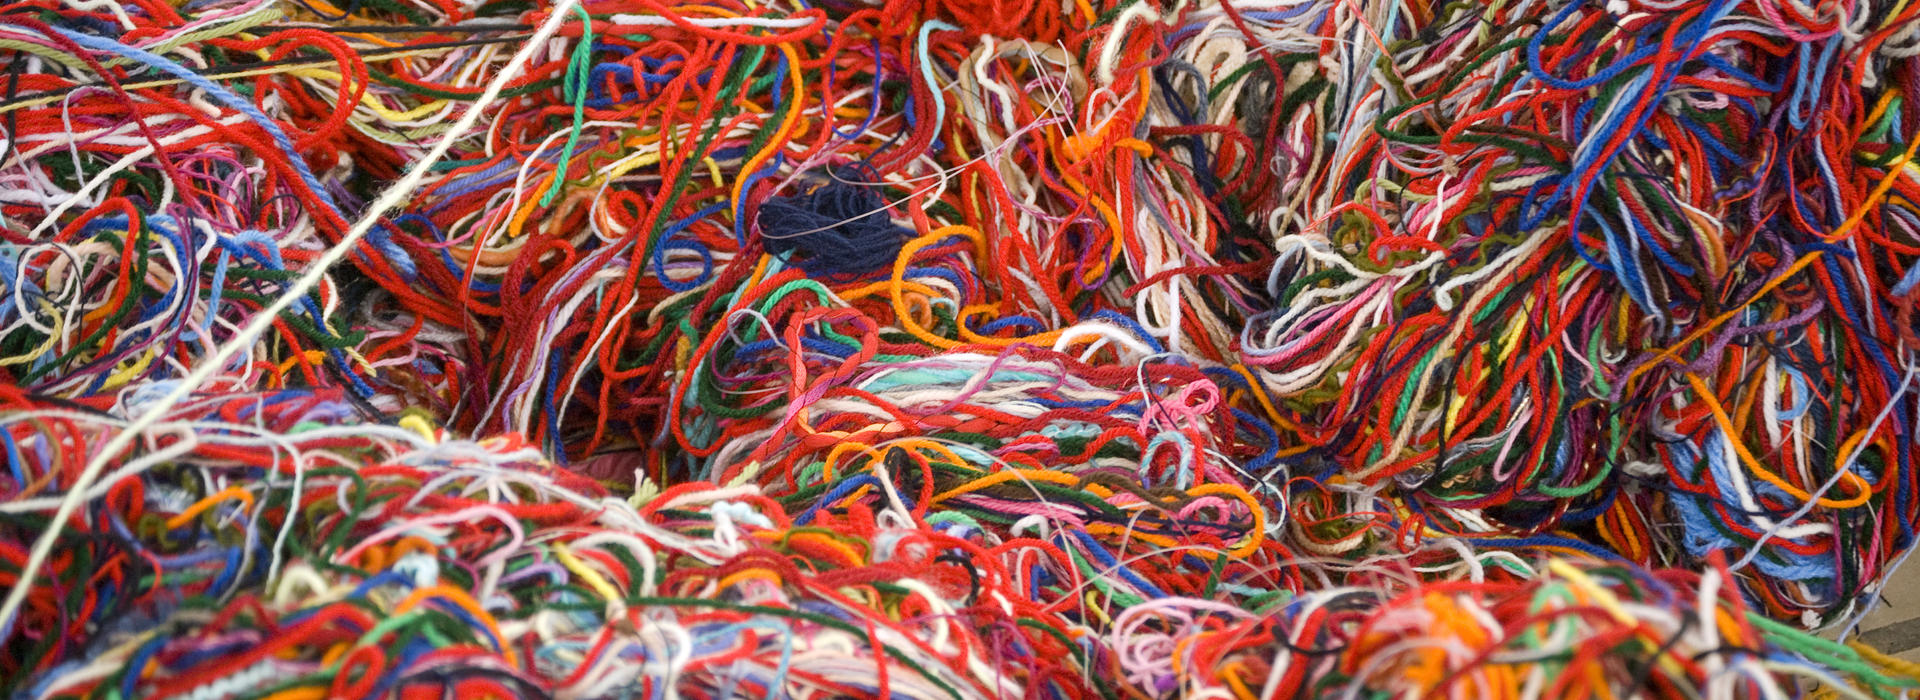 A lot of interconnected bunched up yarn.